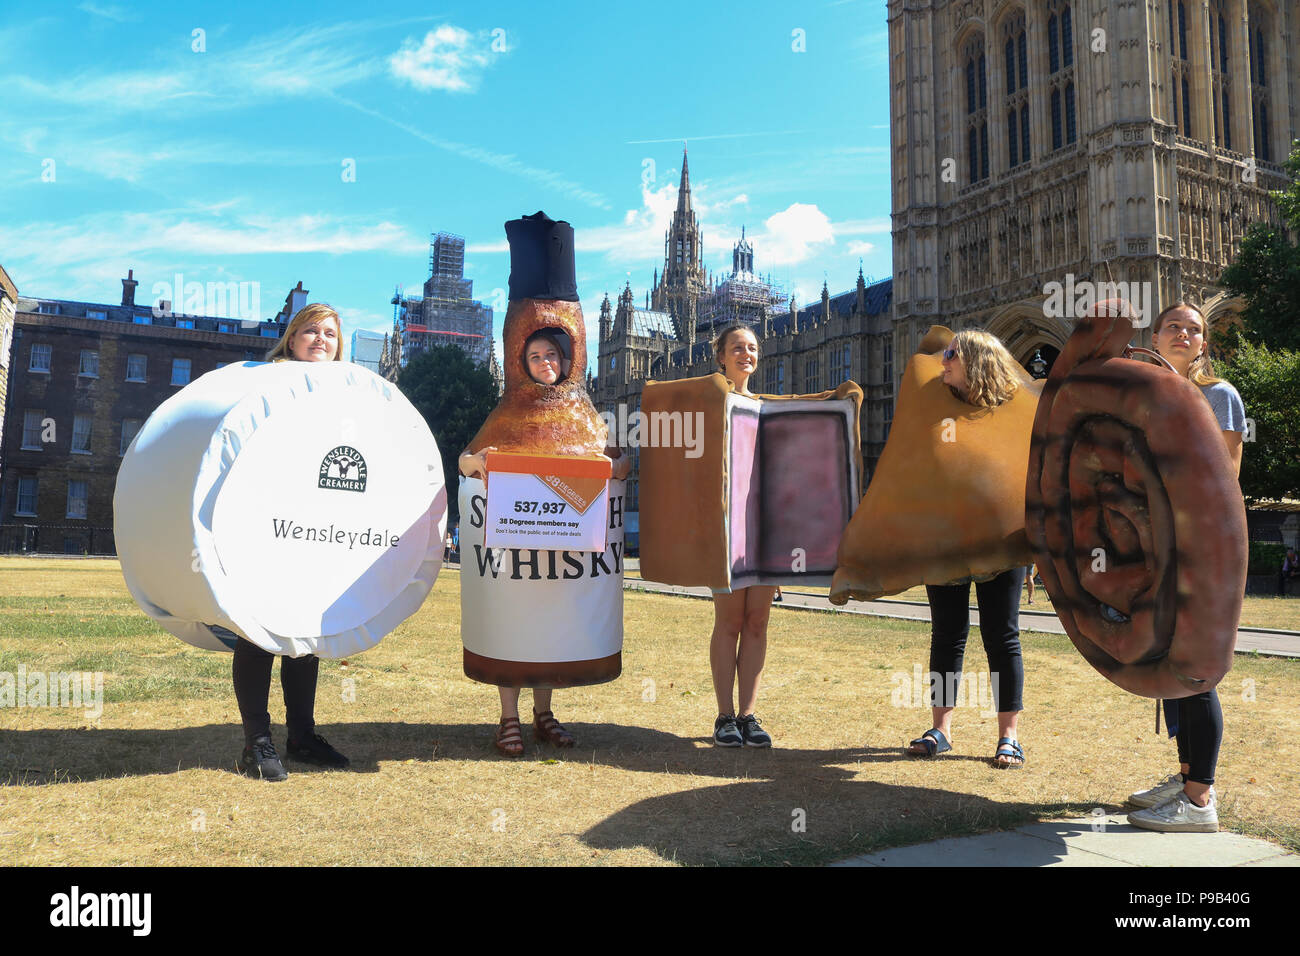 London UK. 17th July 2018 . Protesters dressed as Scotch Whisky, Cornish pasty, Wensleydale cheese, Cumberland sausage and Melton Mowbray pork pie from 38 Degrees People Power Change, a British not-for-profit political outside Parliament who champion the power of ordinary people with a petition  not to lock the public out of trade deals in Brexit talks and  Trade is too important to be done in secret voicing concerns that  all post-Brexit trade deals are accountable and transparent and consulting the public to make sure trade deals work for everyone Credit: amer ghazzal/Alamy Live News Stock Photo